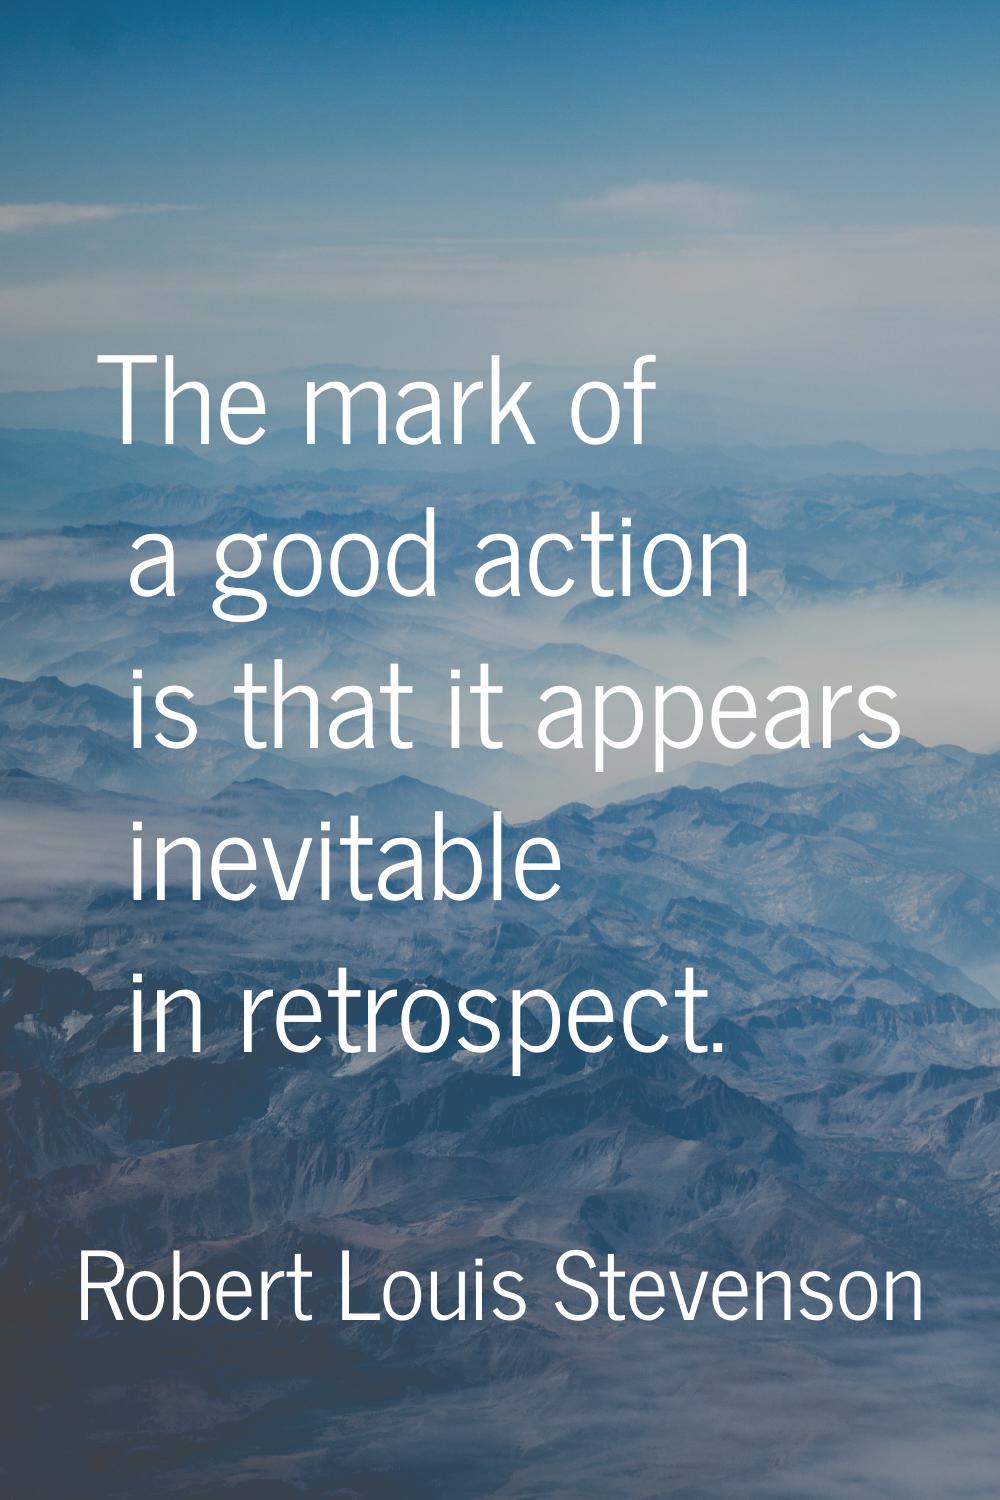 The mark of a good action is that it appears inevitable in retrospect.